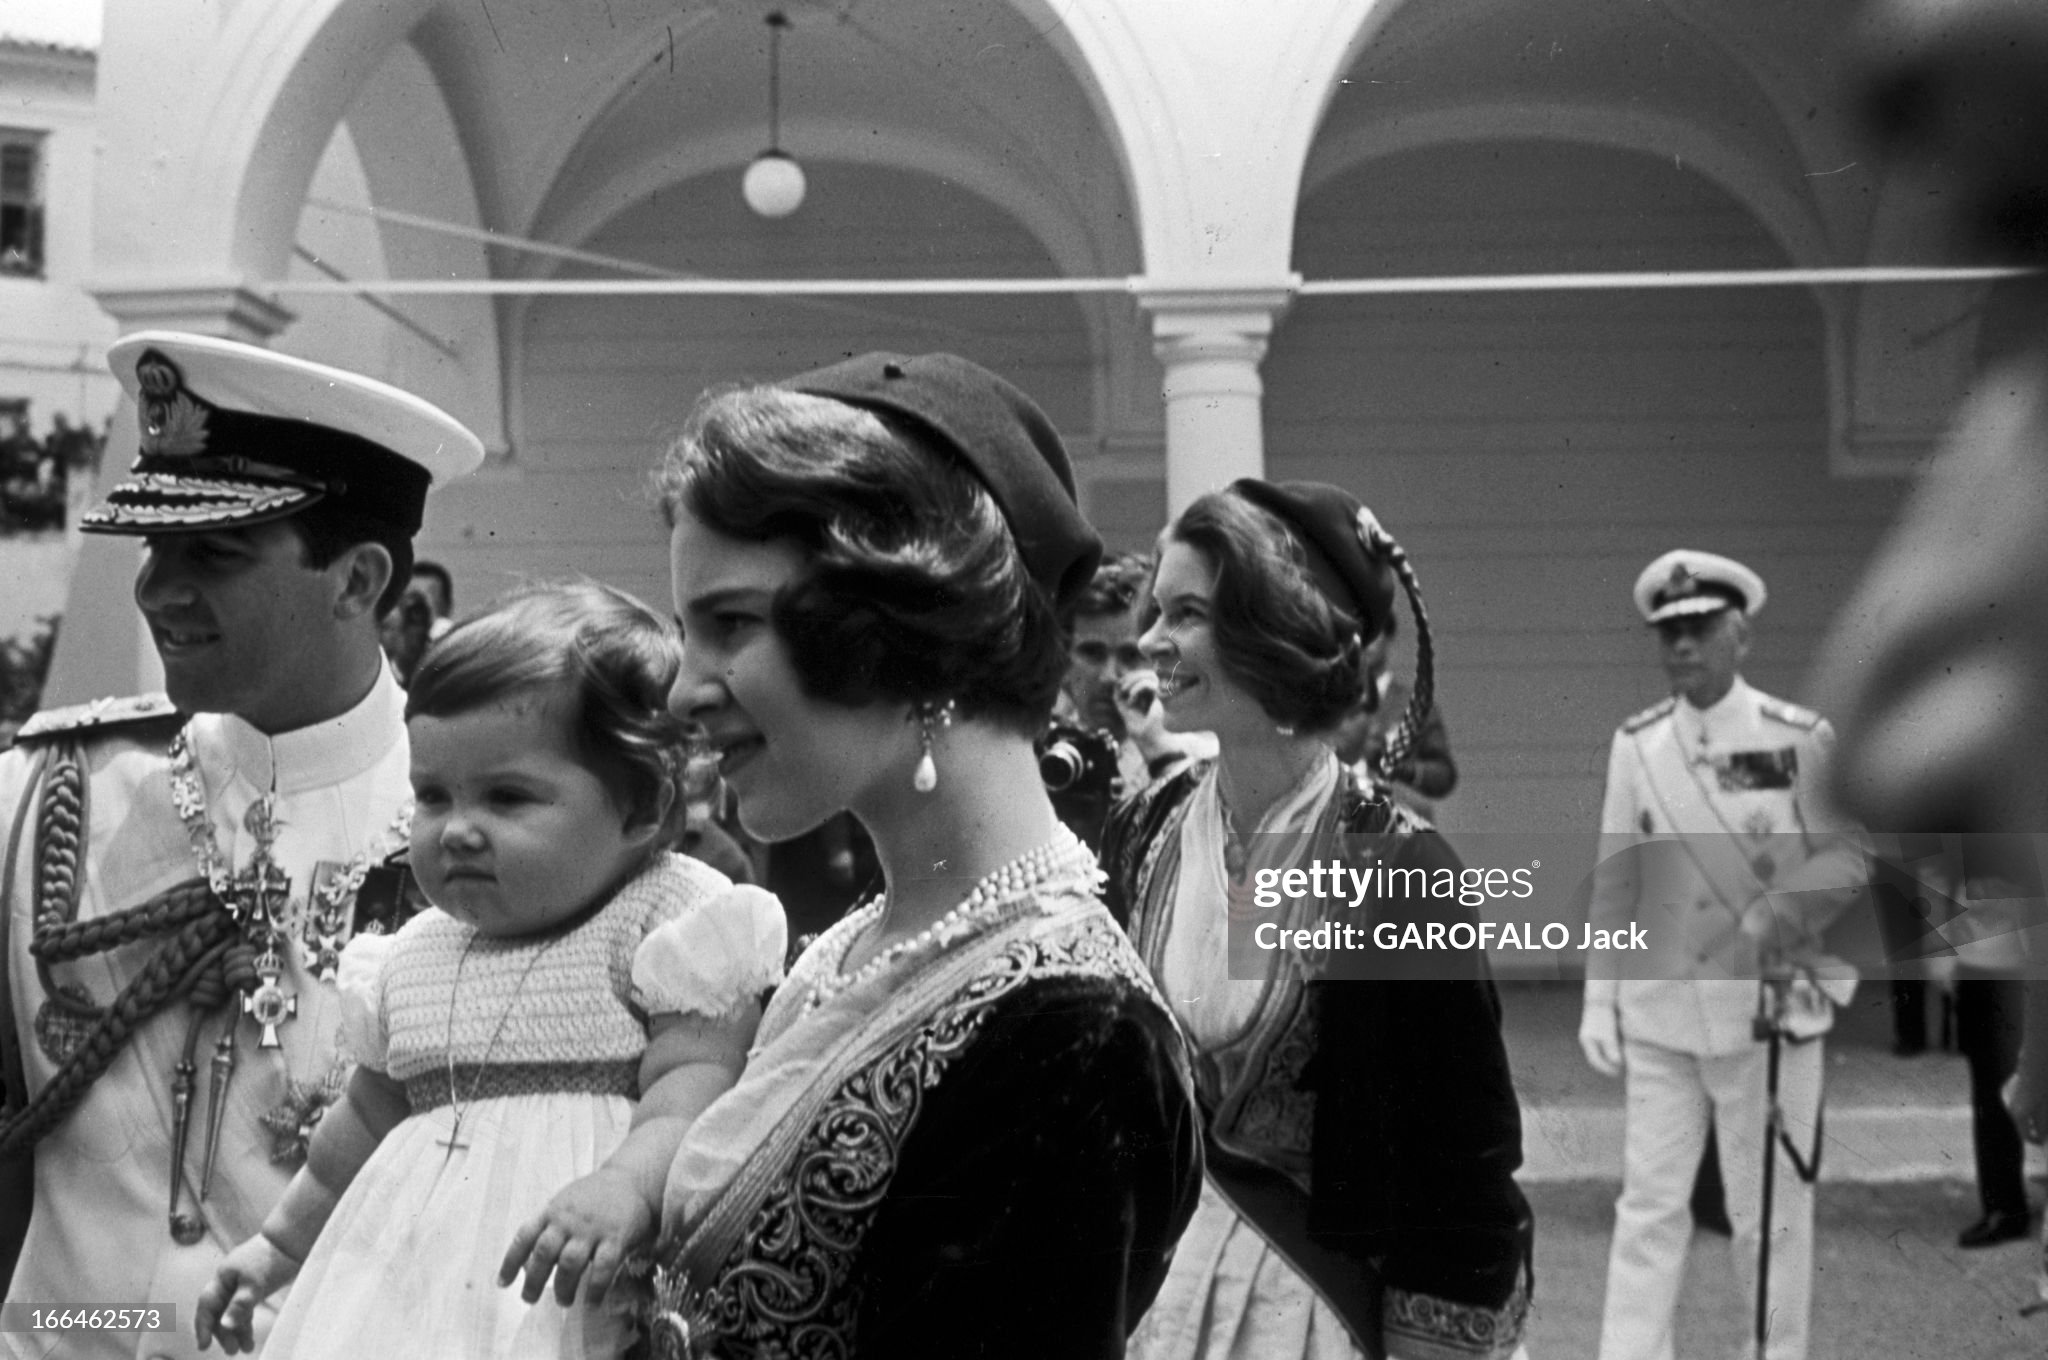 the-royal-family-of-greece-constantin-ii-anne-marie-of-denmark-and-the-princess-alexia-gr%C3%A8ce.jpg